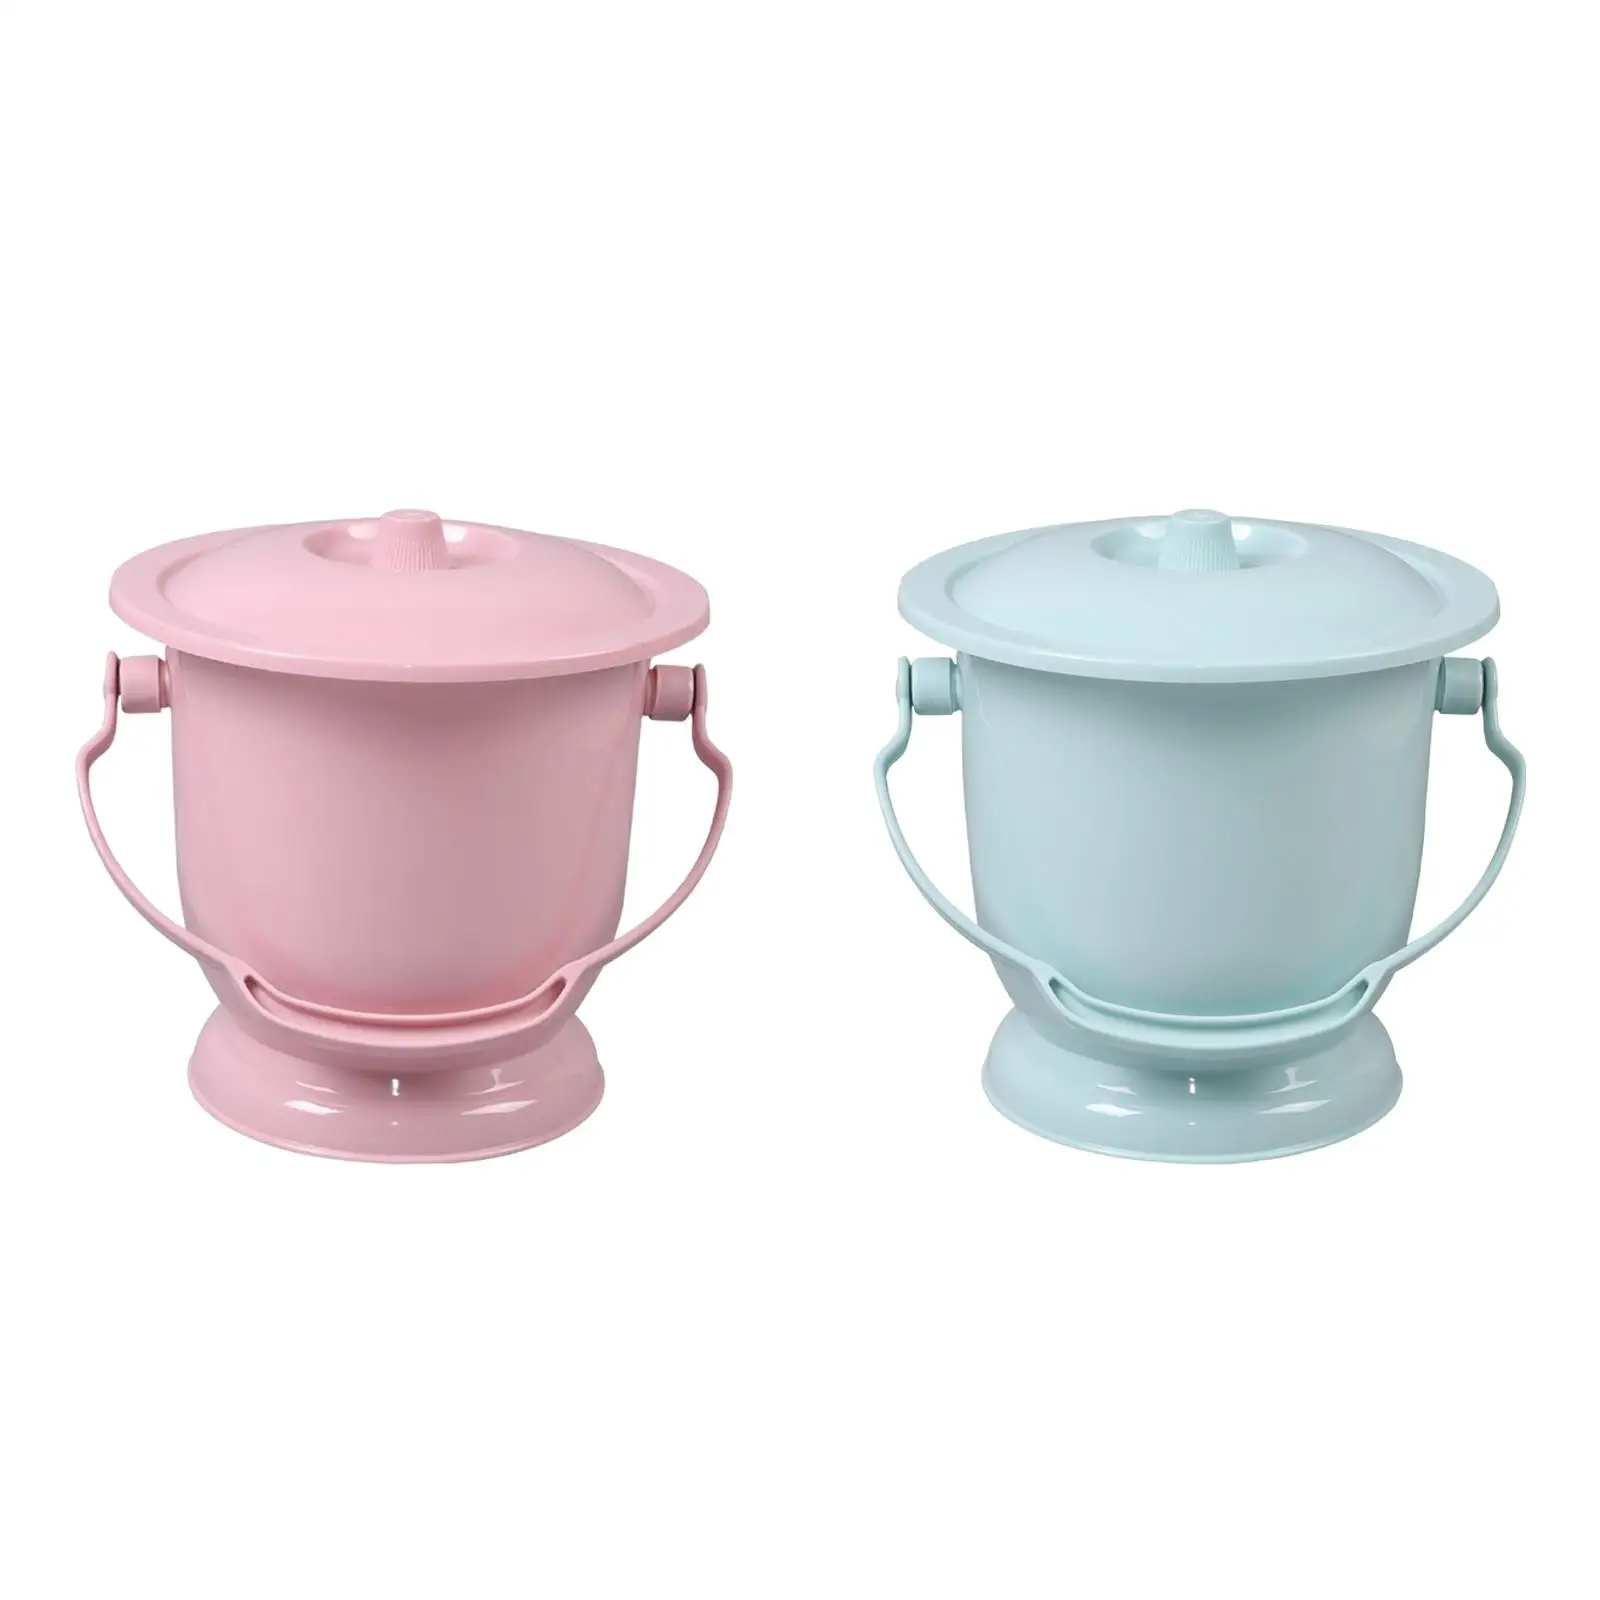 Handheld Spittoon with Lid Stylish Urine Bucket Mini Toilets for Household